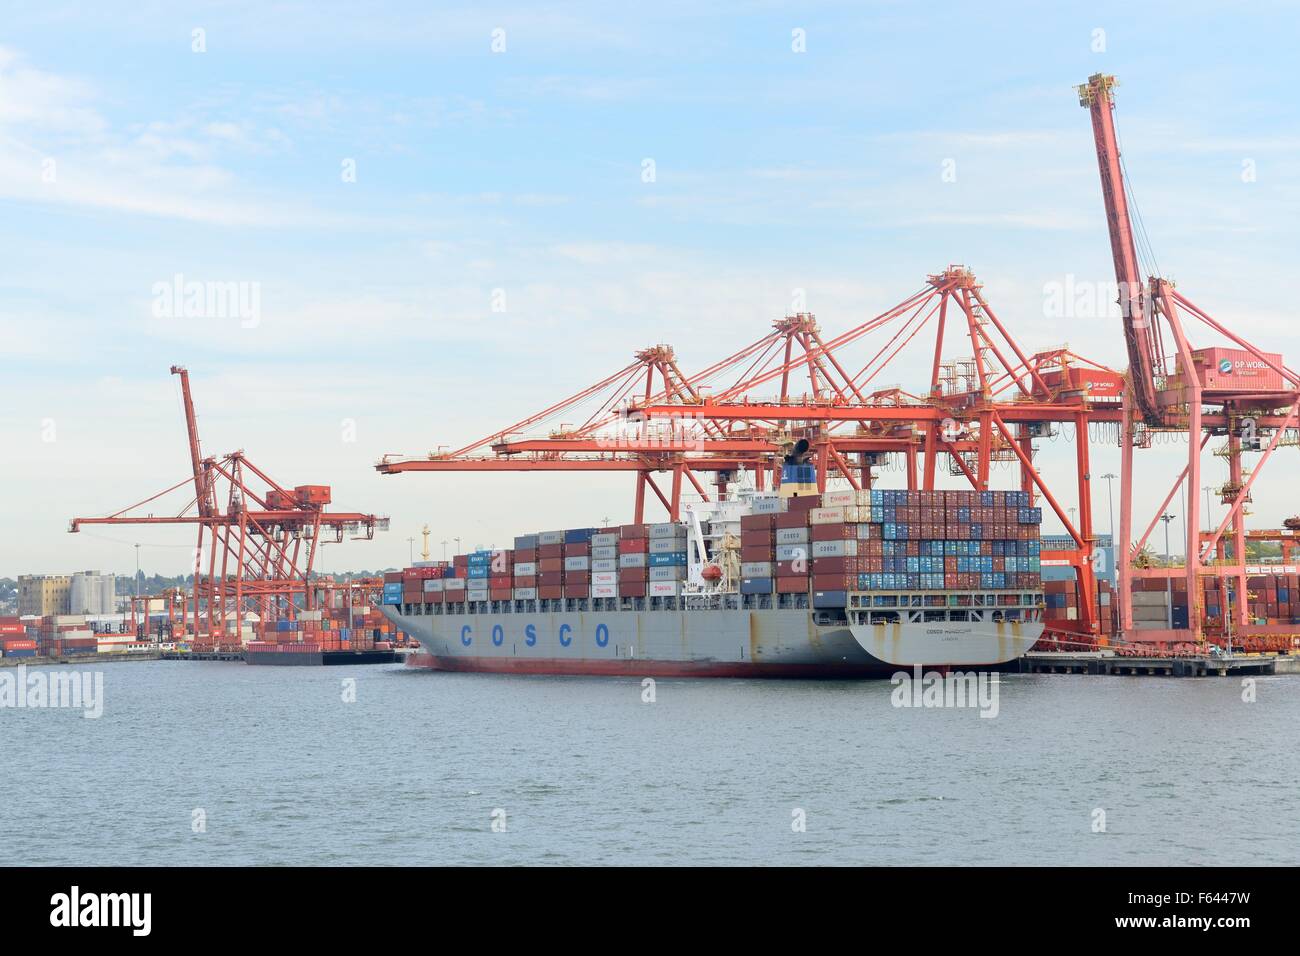 The container ship 'Cosco' being loaded at DP World Vancouver, British Columbia, Canada Stock Photo